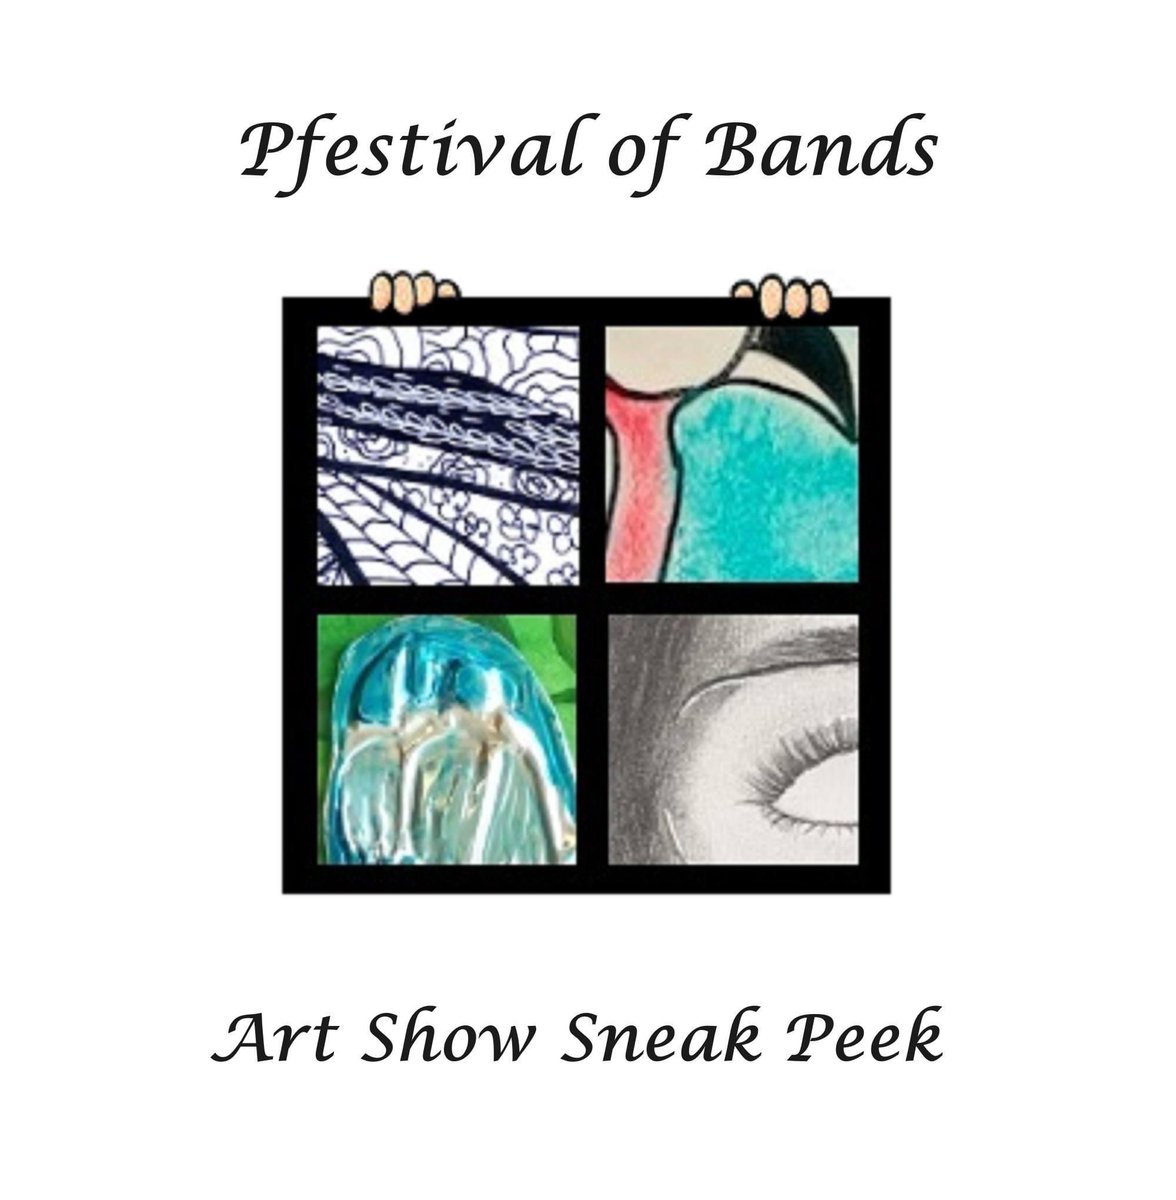 Art Show Sneak Peek! What do you think each of these artists created? Come see fabulous artwork from all over @pfisd displayed on the jumbotron during the 20th Annual Pfestival of Bands. October 2, 2023 7:00 p.m. The Pfield #PfISDynamic #pfamily